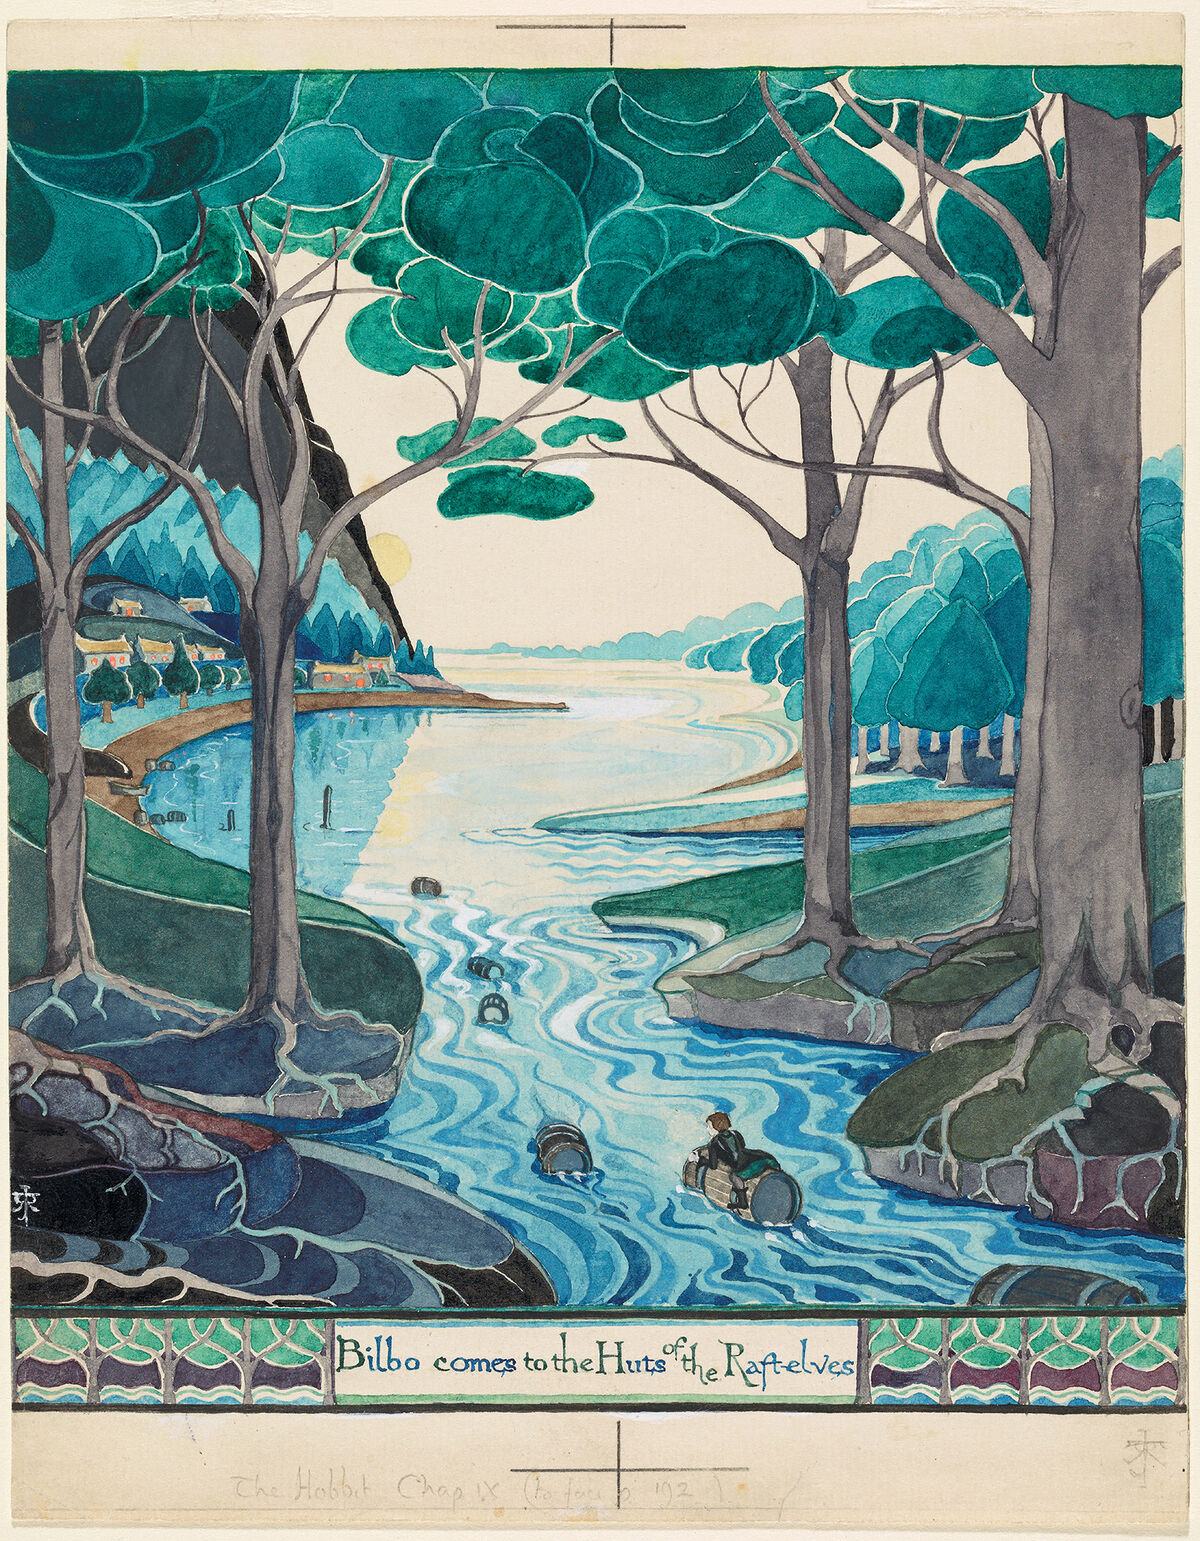 J.R.R. Tolkien’s Art Shaped “The Hobbit” and “The Lord of the Rings